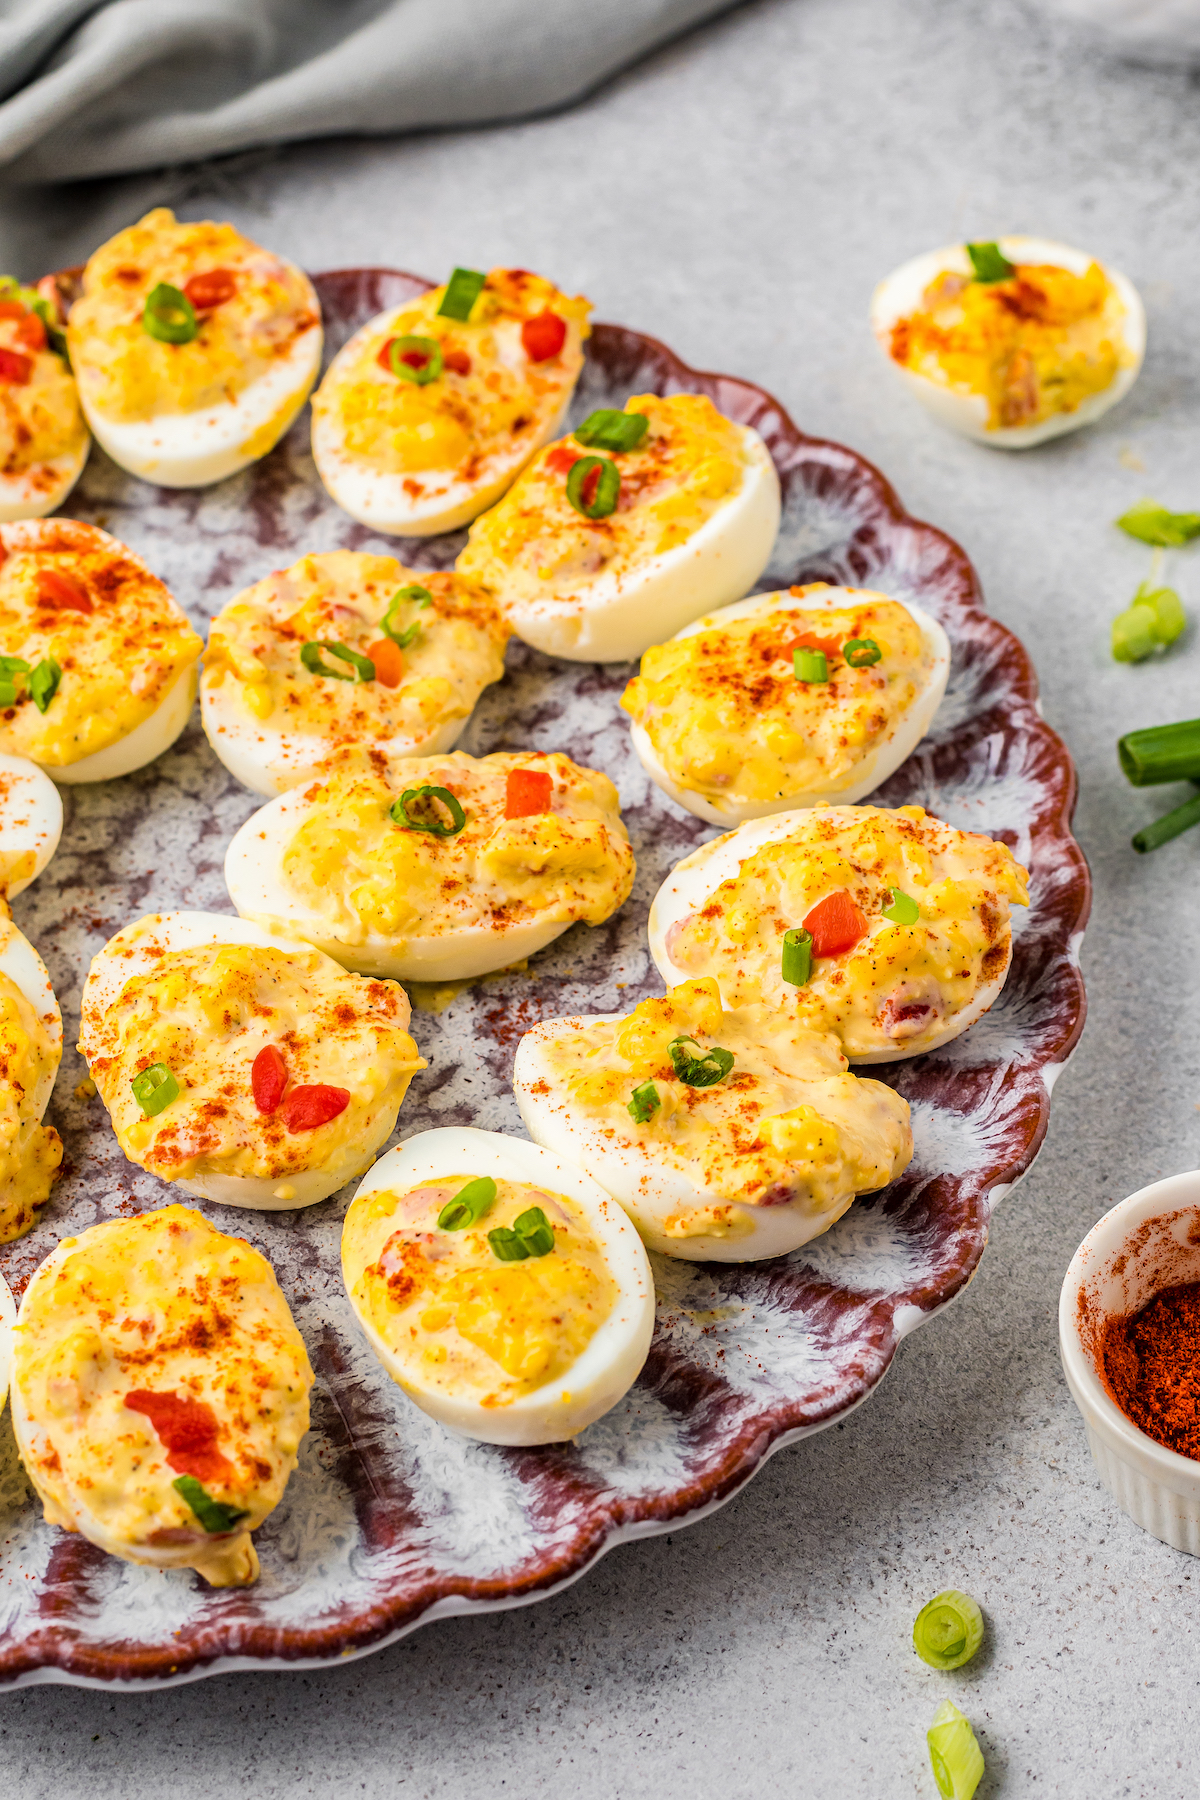 A serving platted filled with homemade deviled eggs